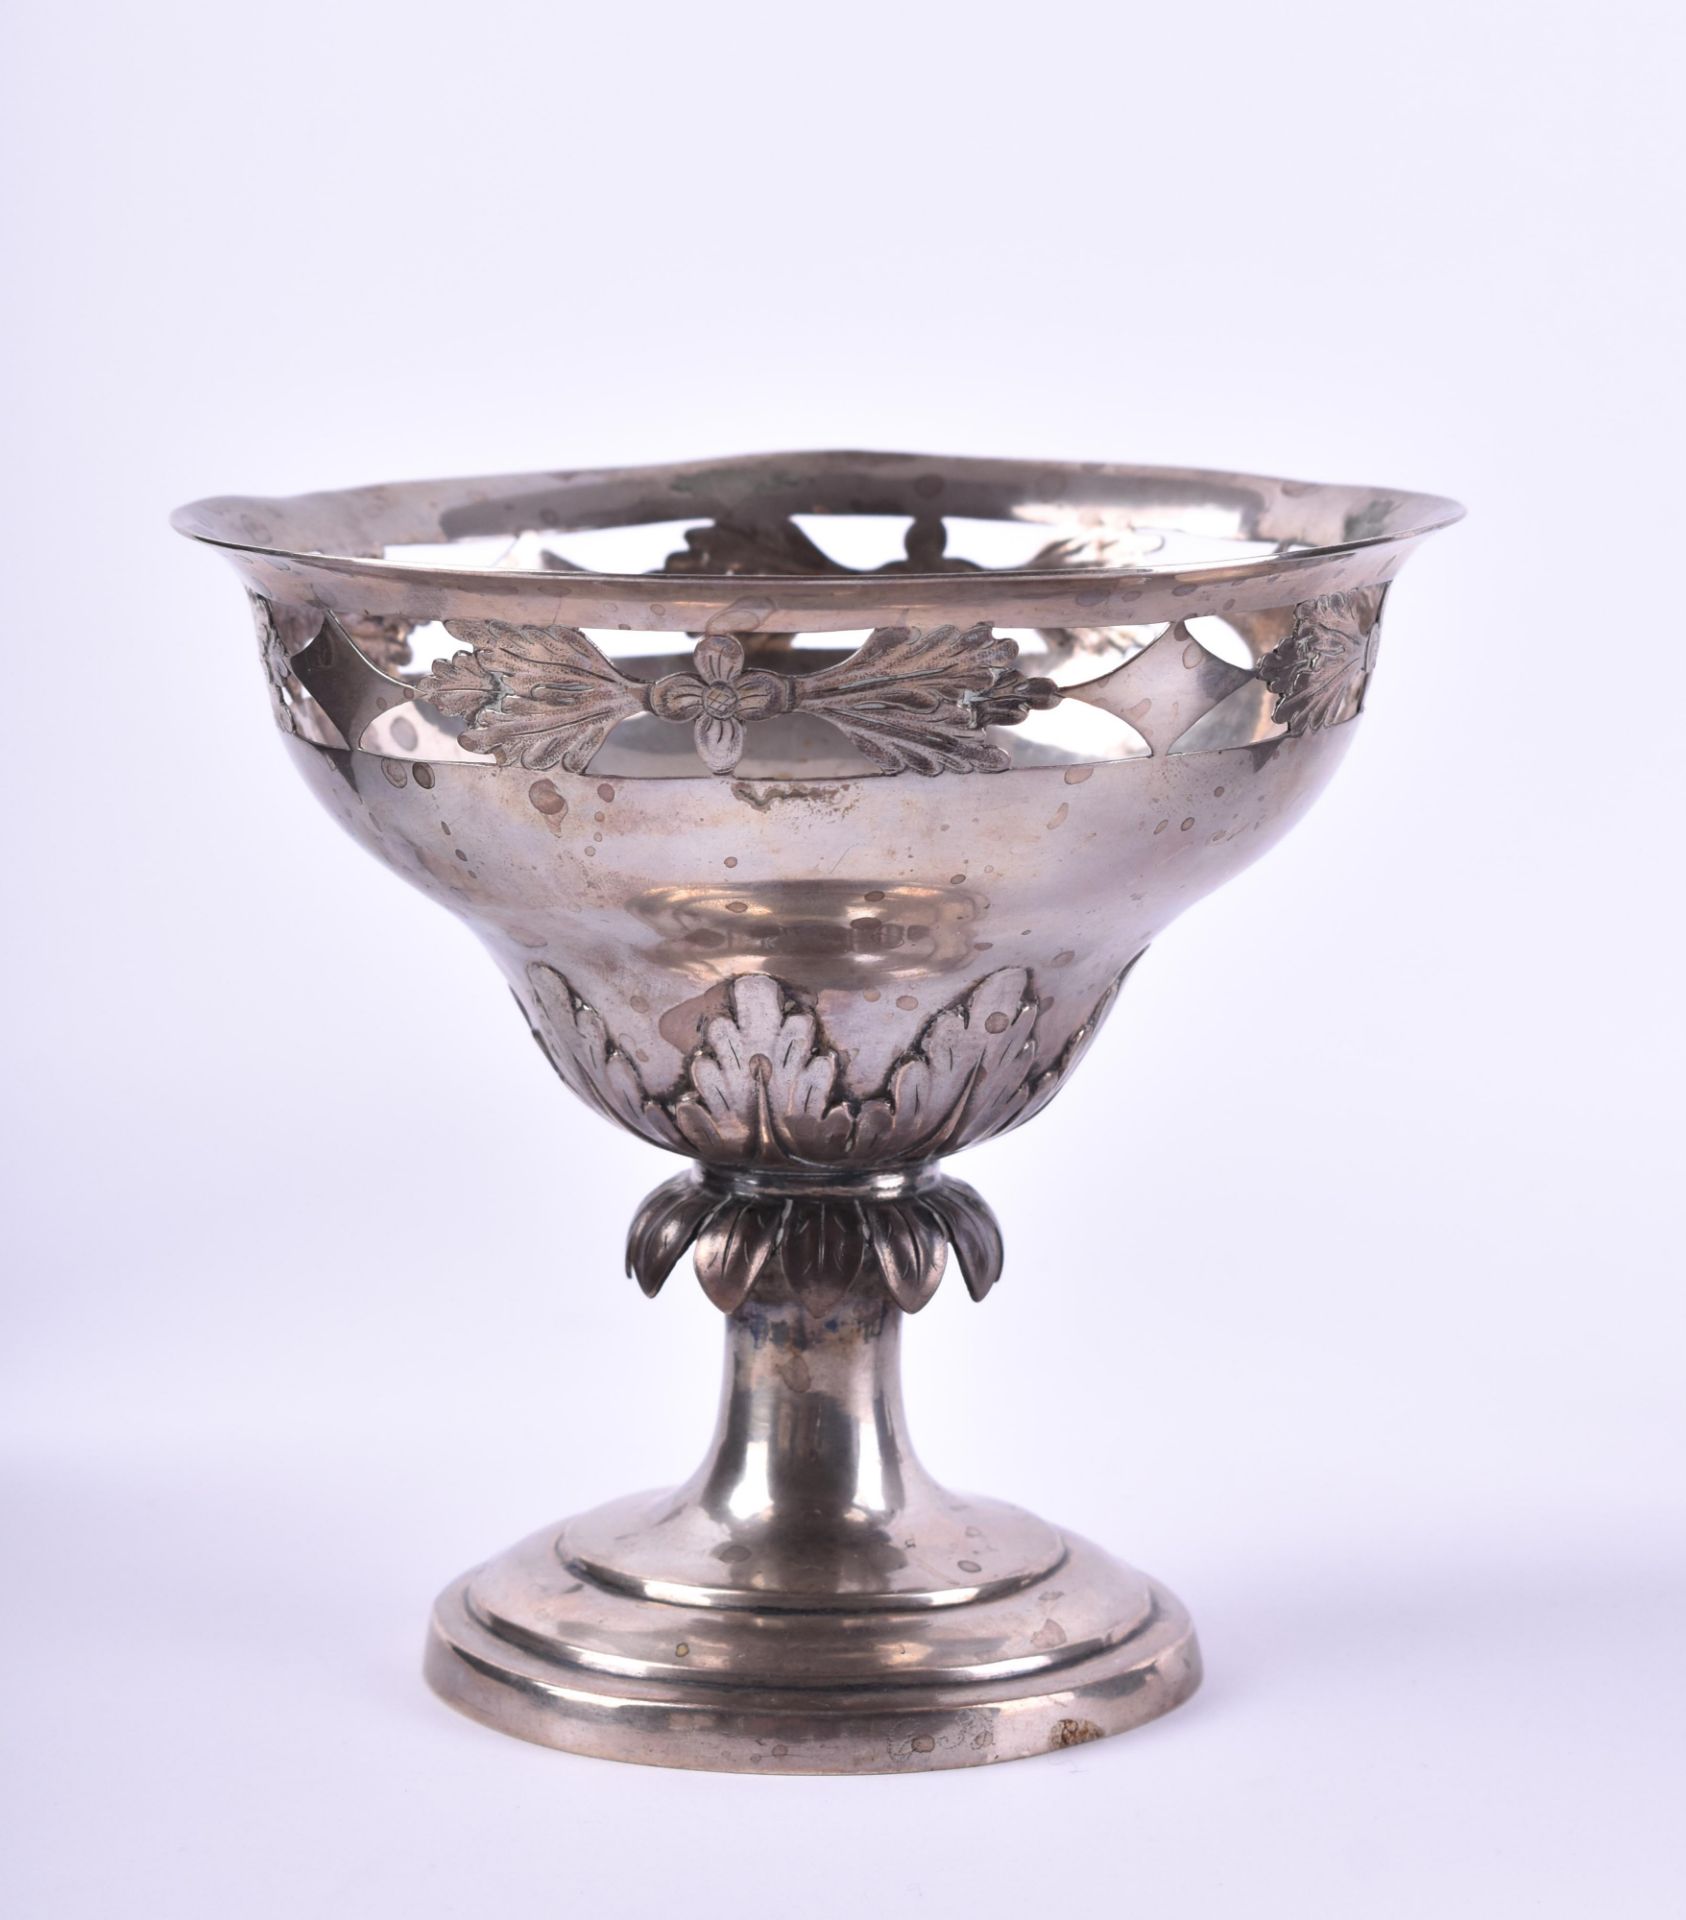  Foot bowl 18th / 19th century - Image 2 of 5